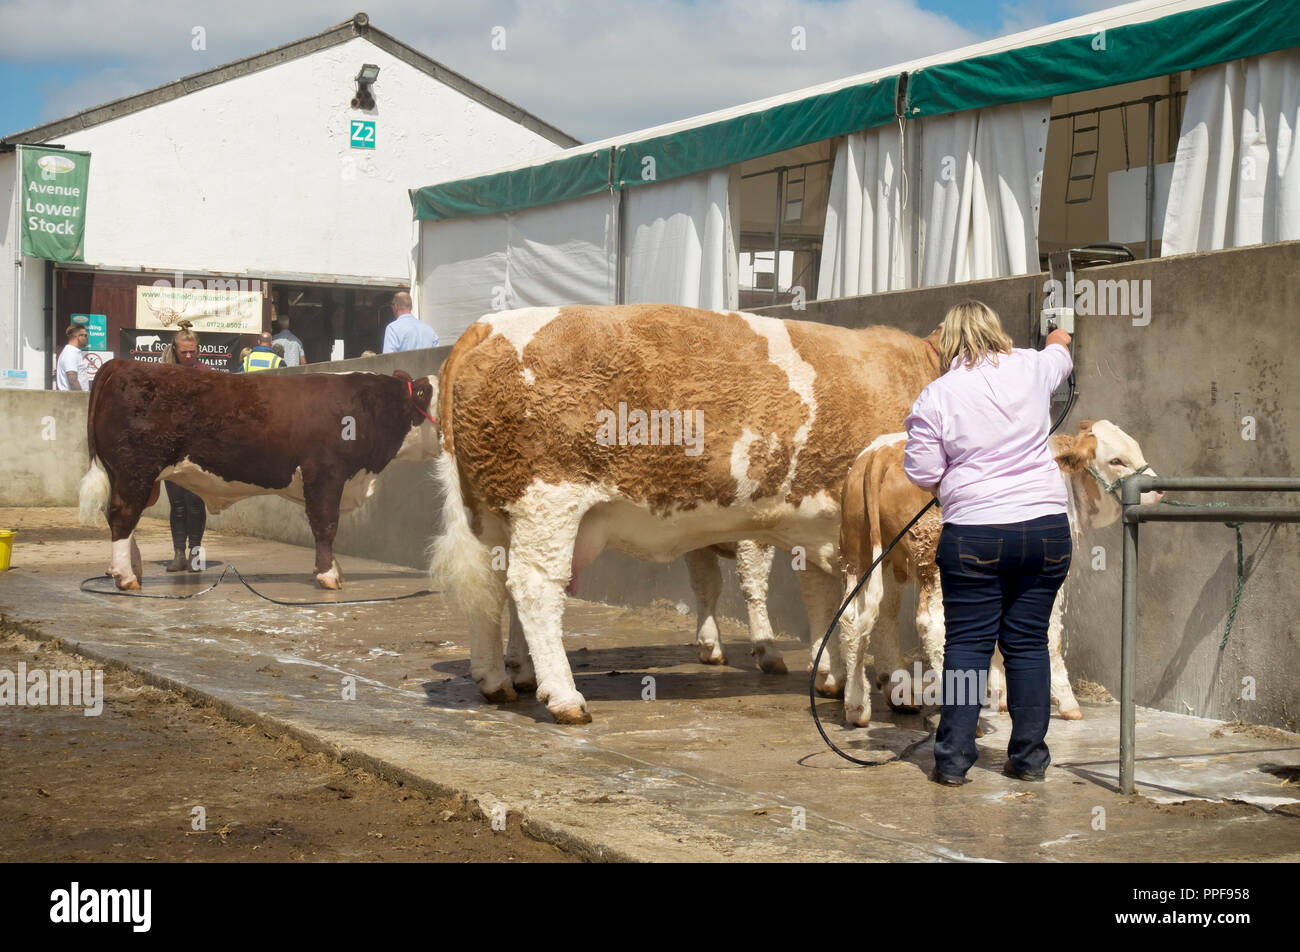 Cattle being washed by farmer before judging Great Yorkshire Show in summer Harrogate North Yorkshire England UK United Kingdom GB Great Britain Stock Photo